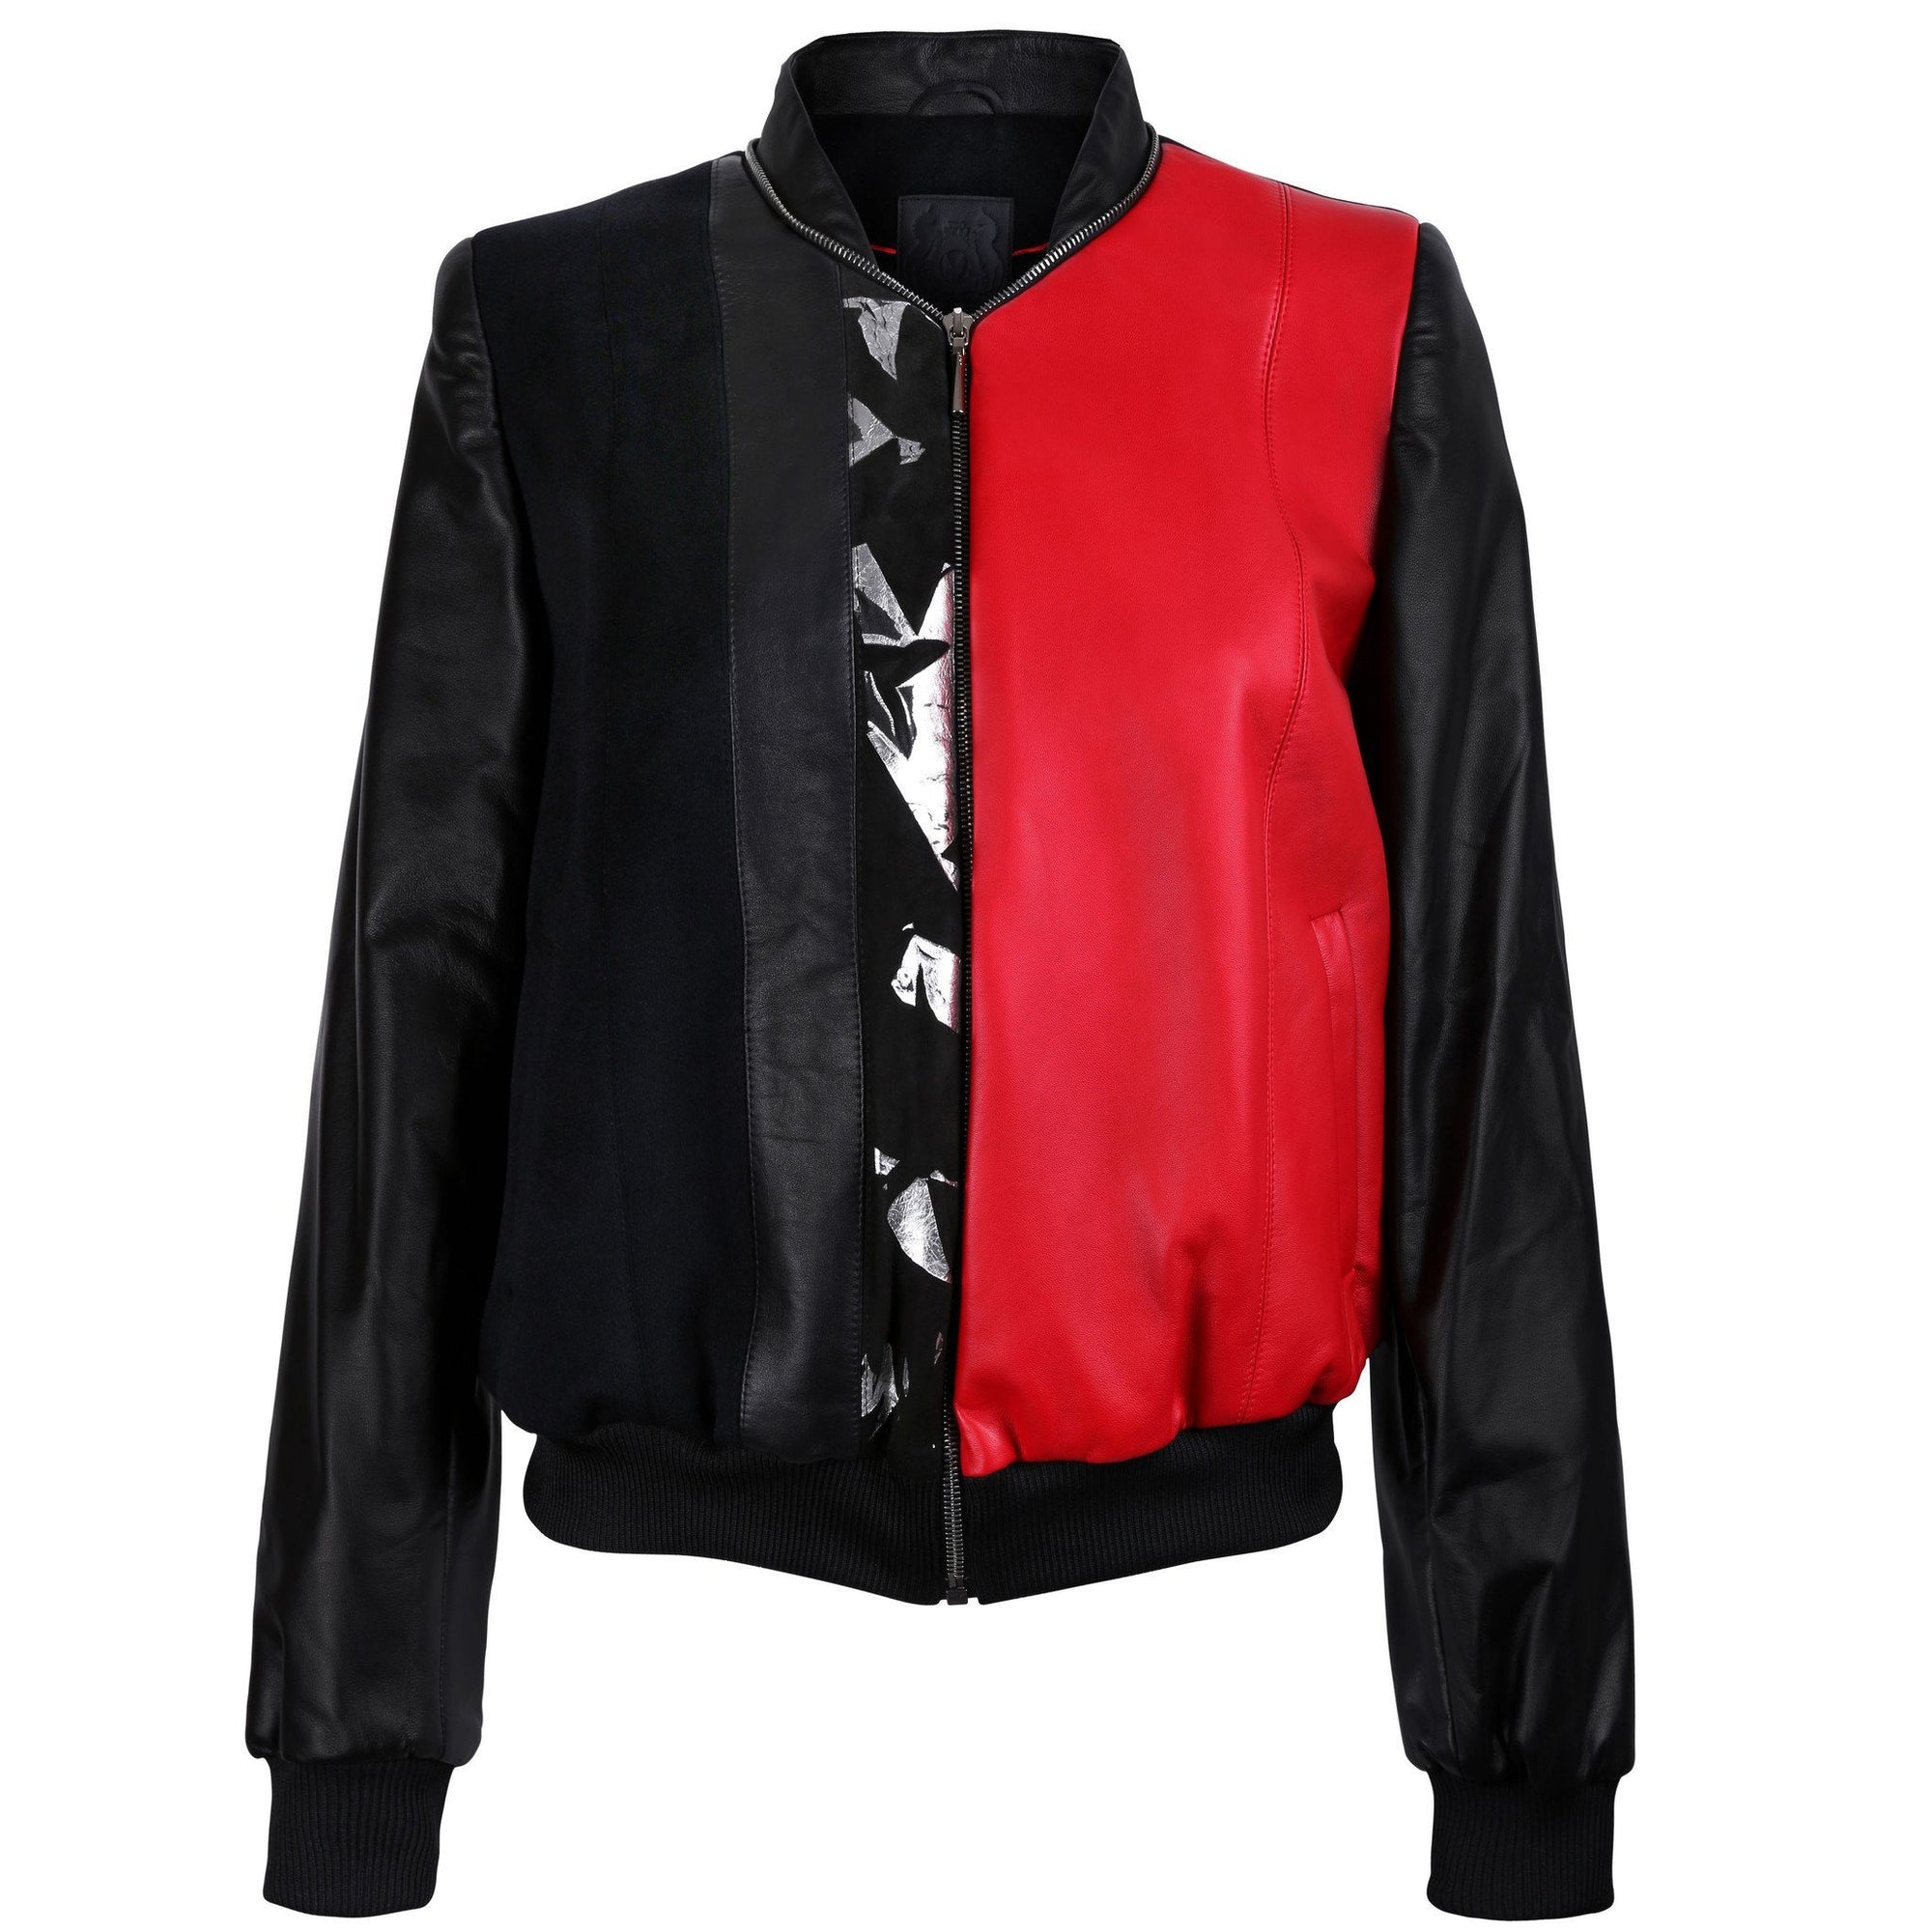 Black and Red Leather Bomber Jacket with Silver Print Motif - VOLS & ORIGINAL